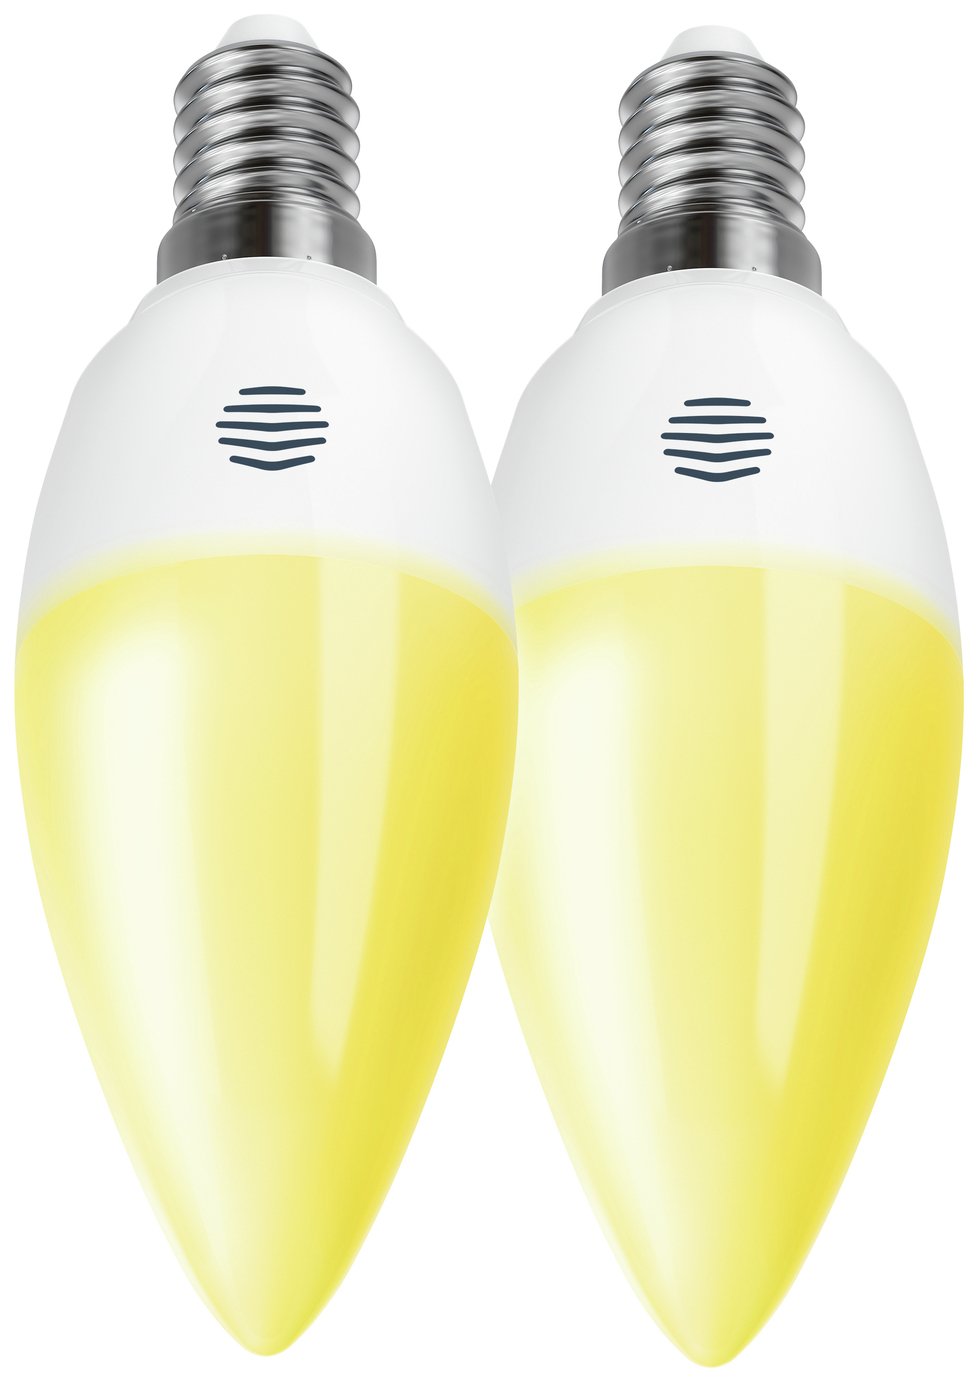 Hive Dimmable Smart E14 Bulb review